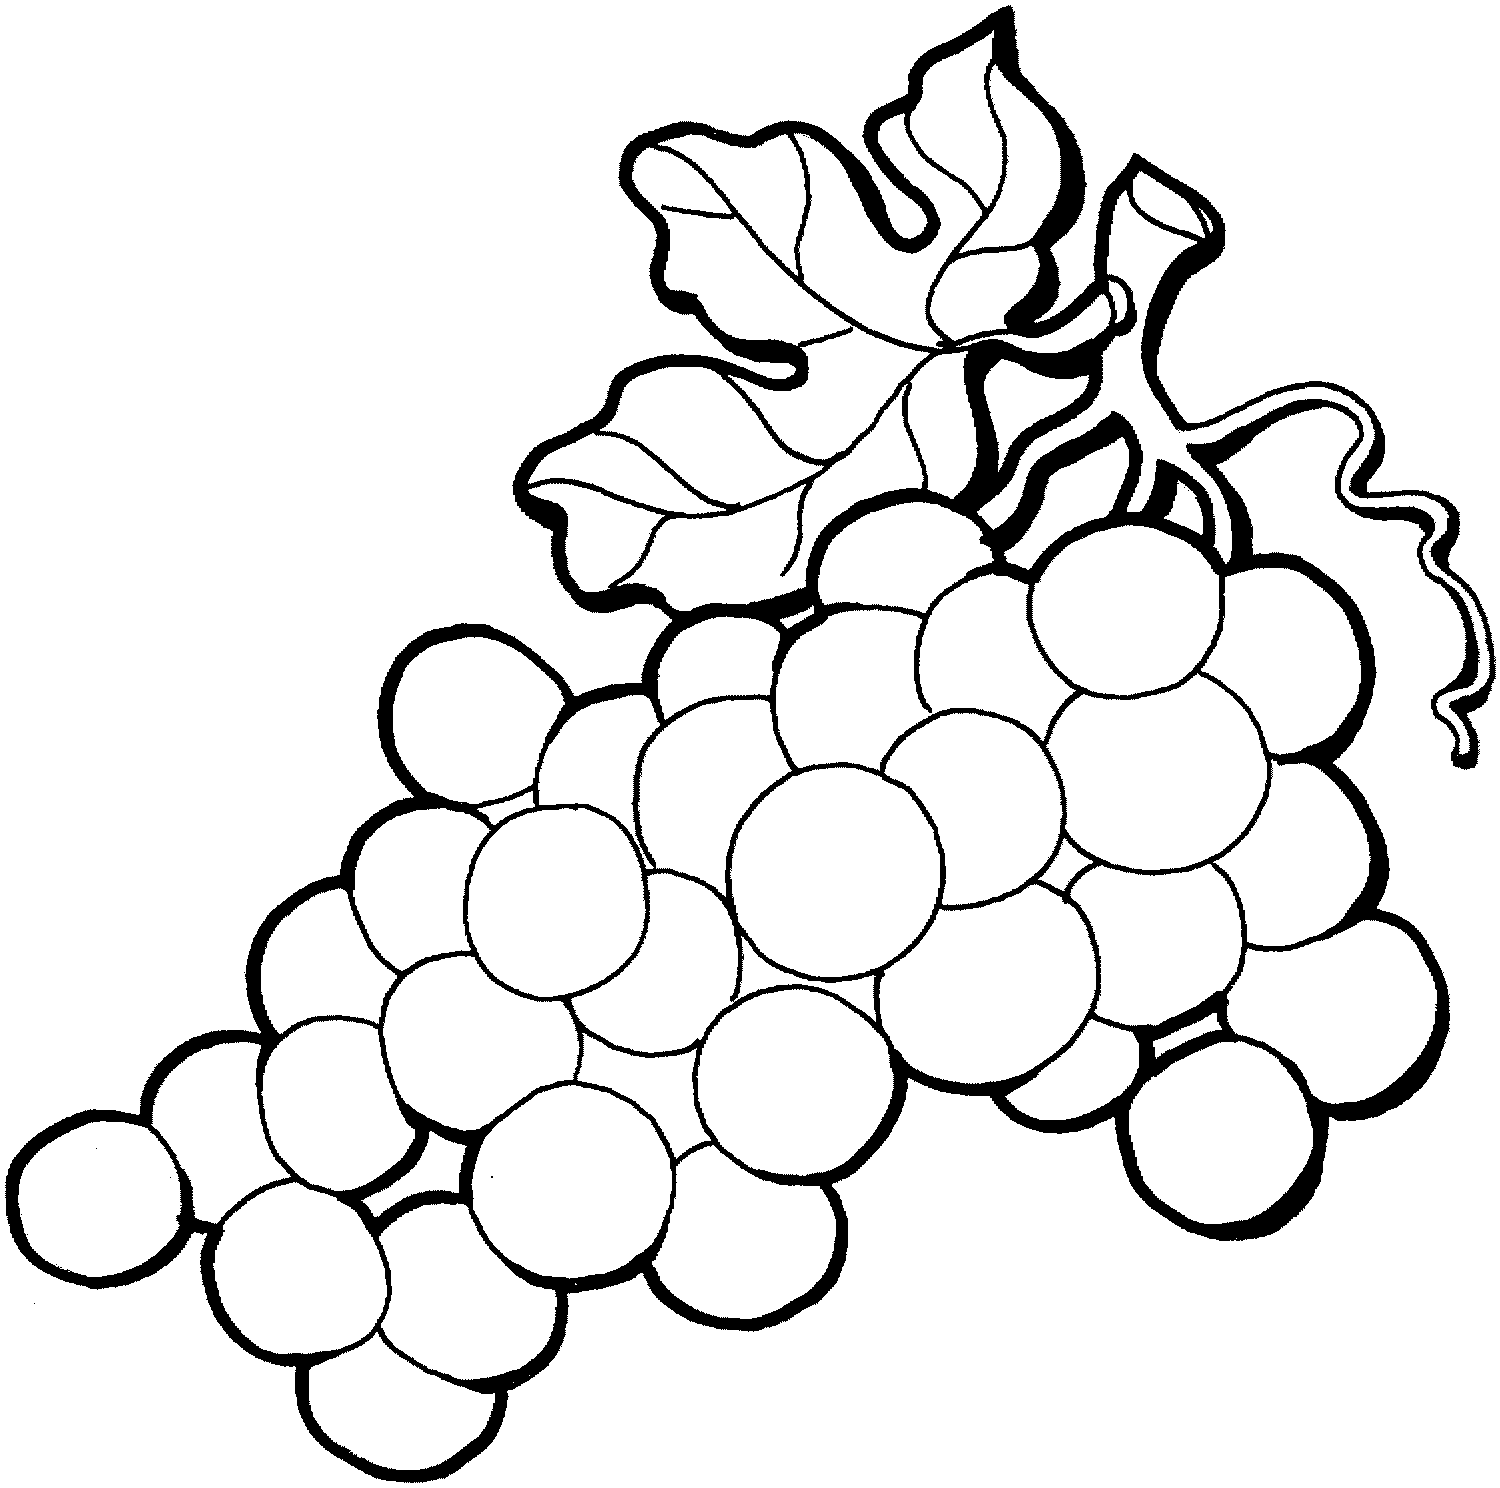 Drawing Of Grapes - ClipArt Best